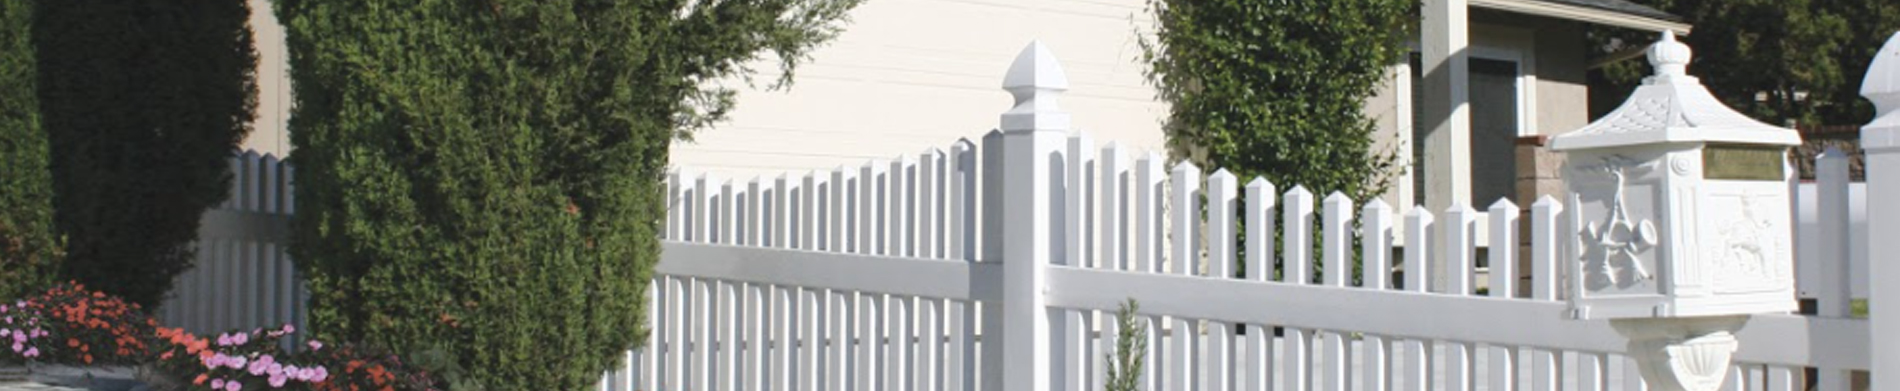 Having a beautiful fence around your home is an excellent idea